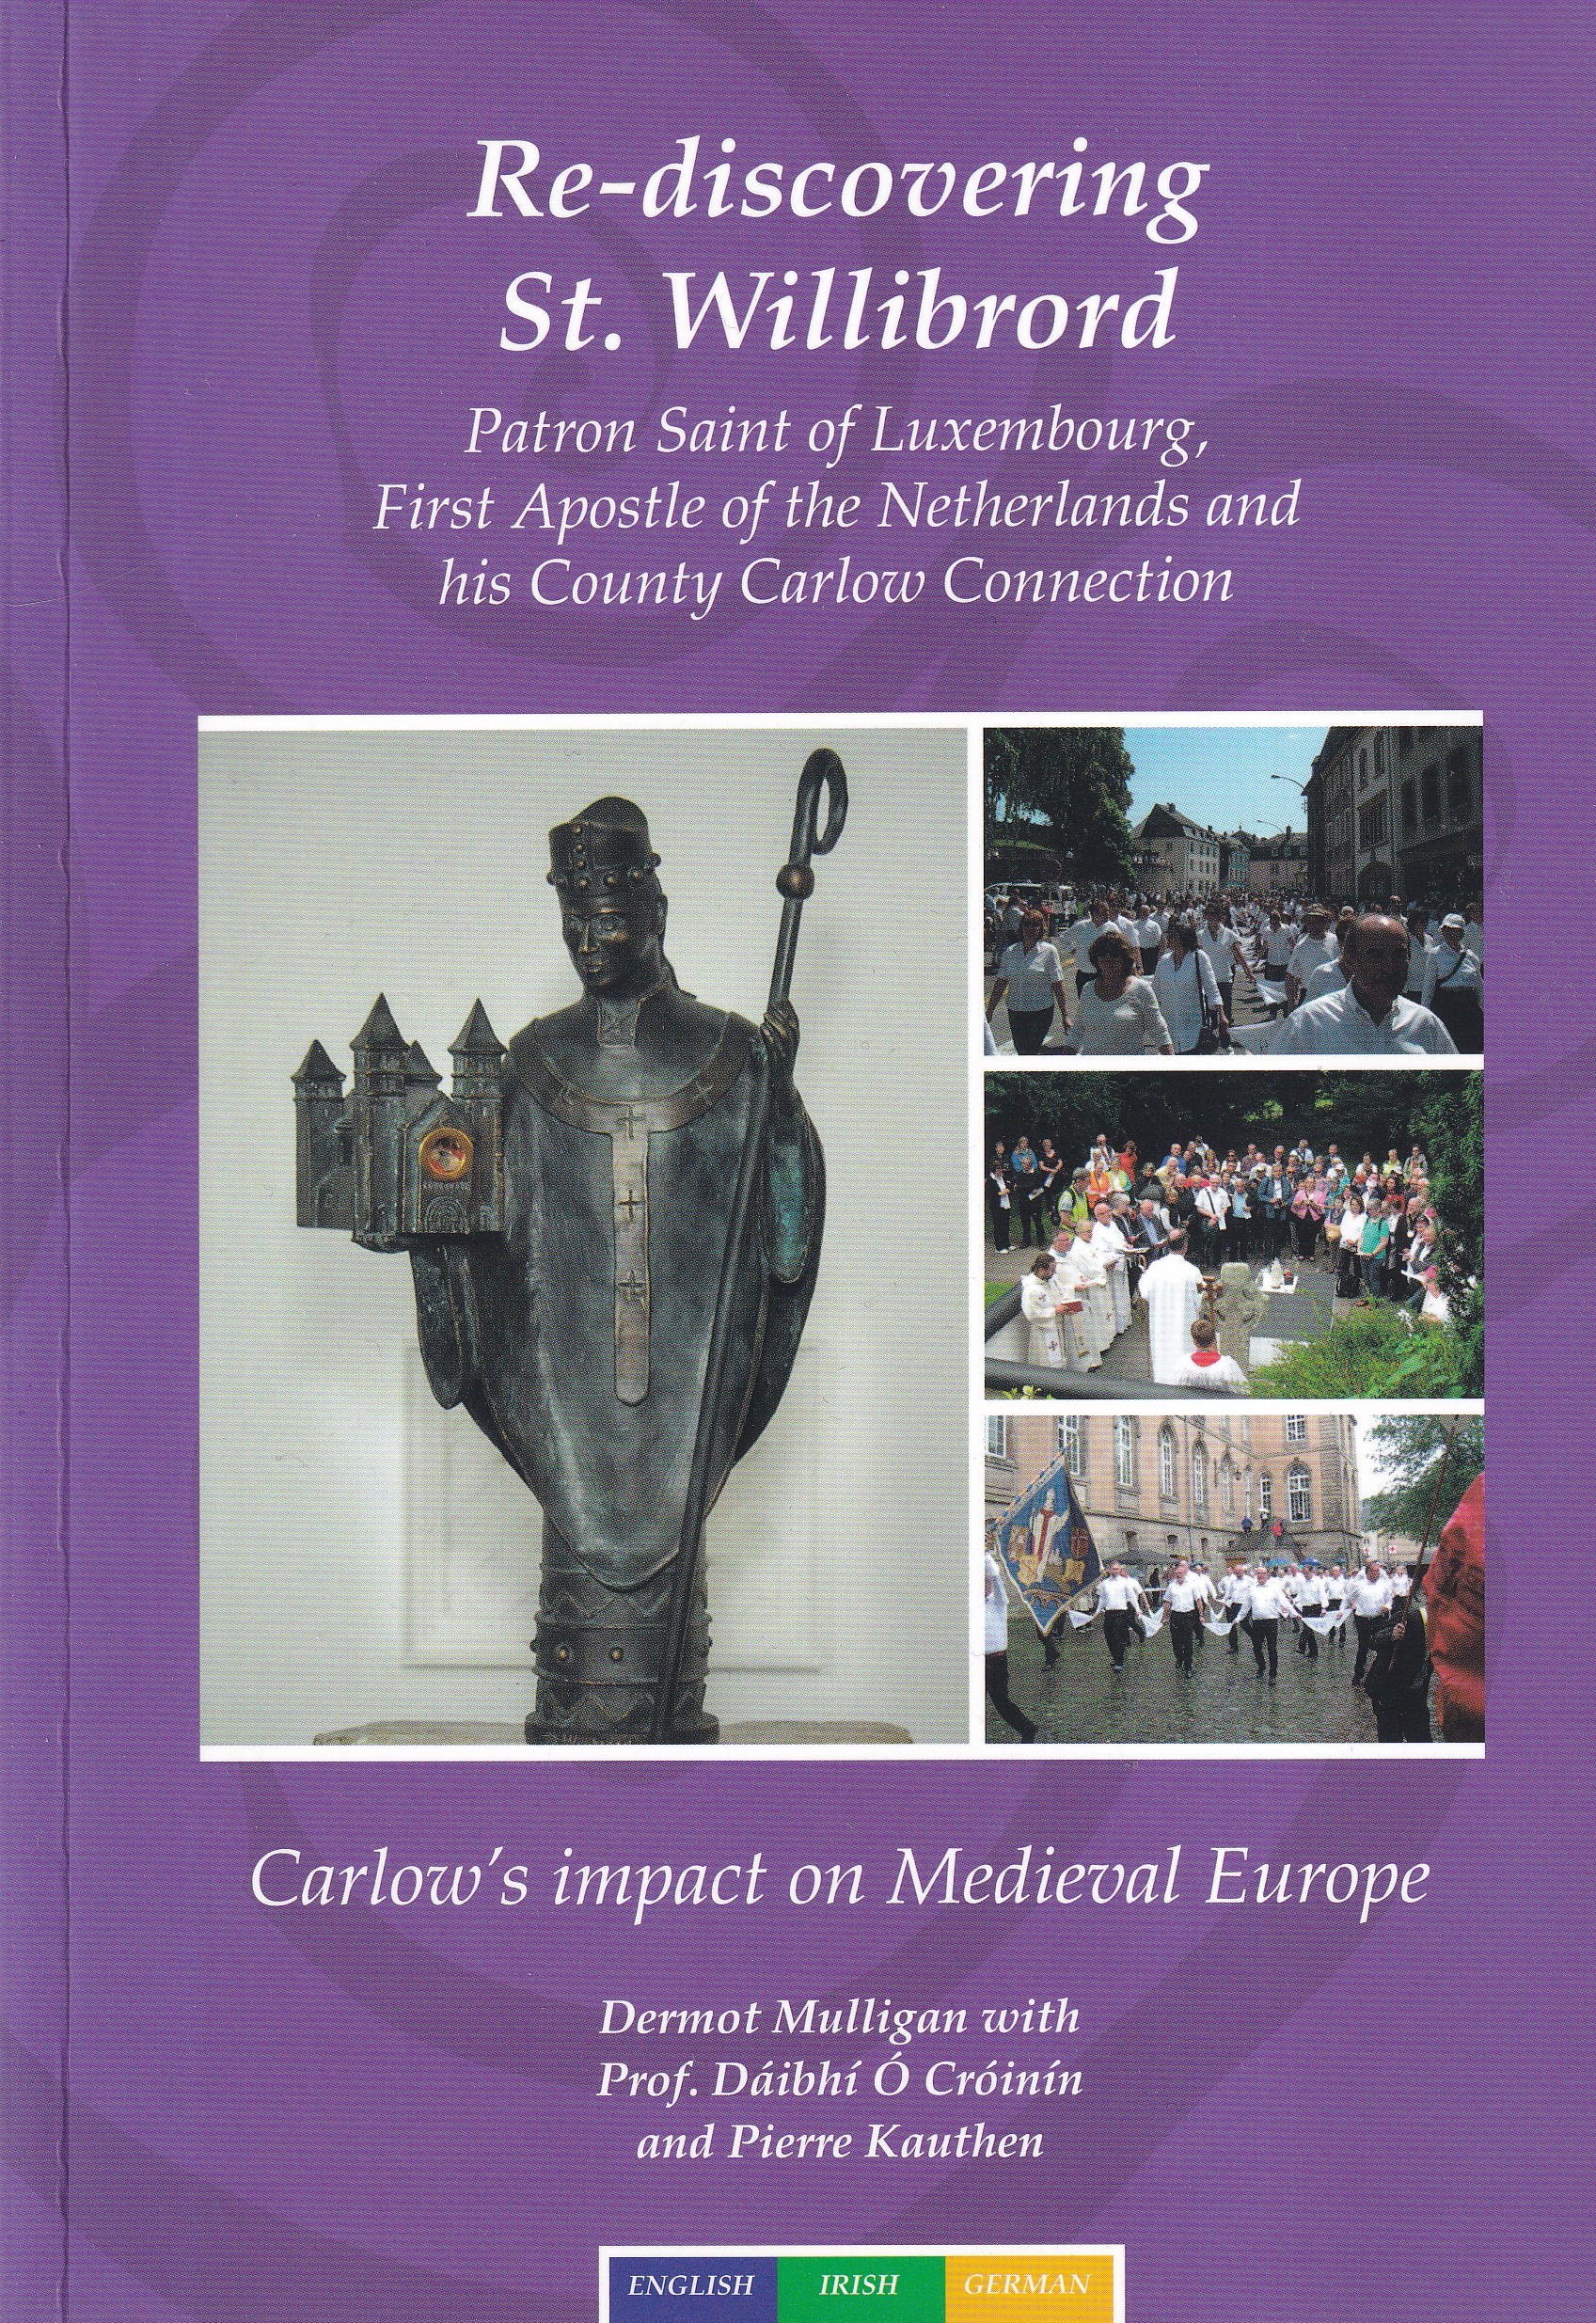 Re-discovering St. Willibrord: Patron Saint of Luxembourg, First Apostle of the Netherlands and his County Carlow Connection- Carlow’s Impact on Medieval Europe- Signed by Dermot Mulligan, Dáibhí Ó Cróinín and Pierre Kauthen